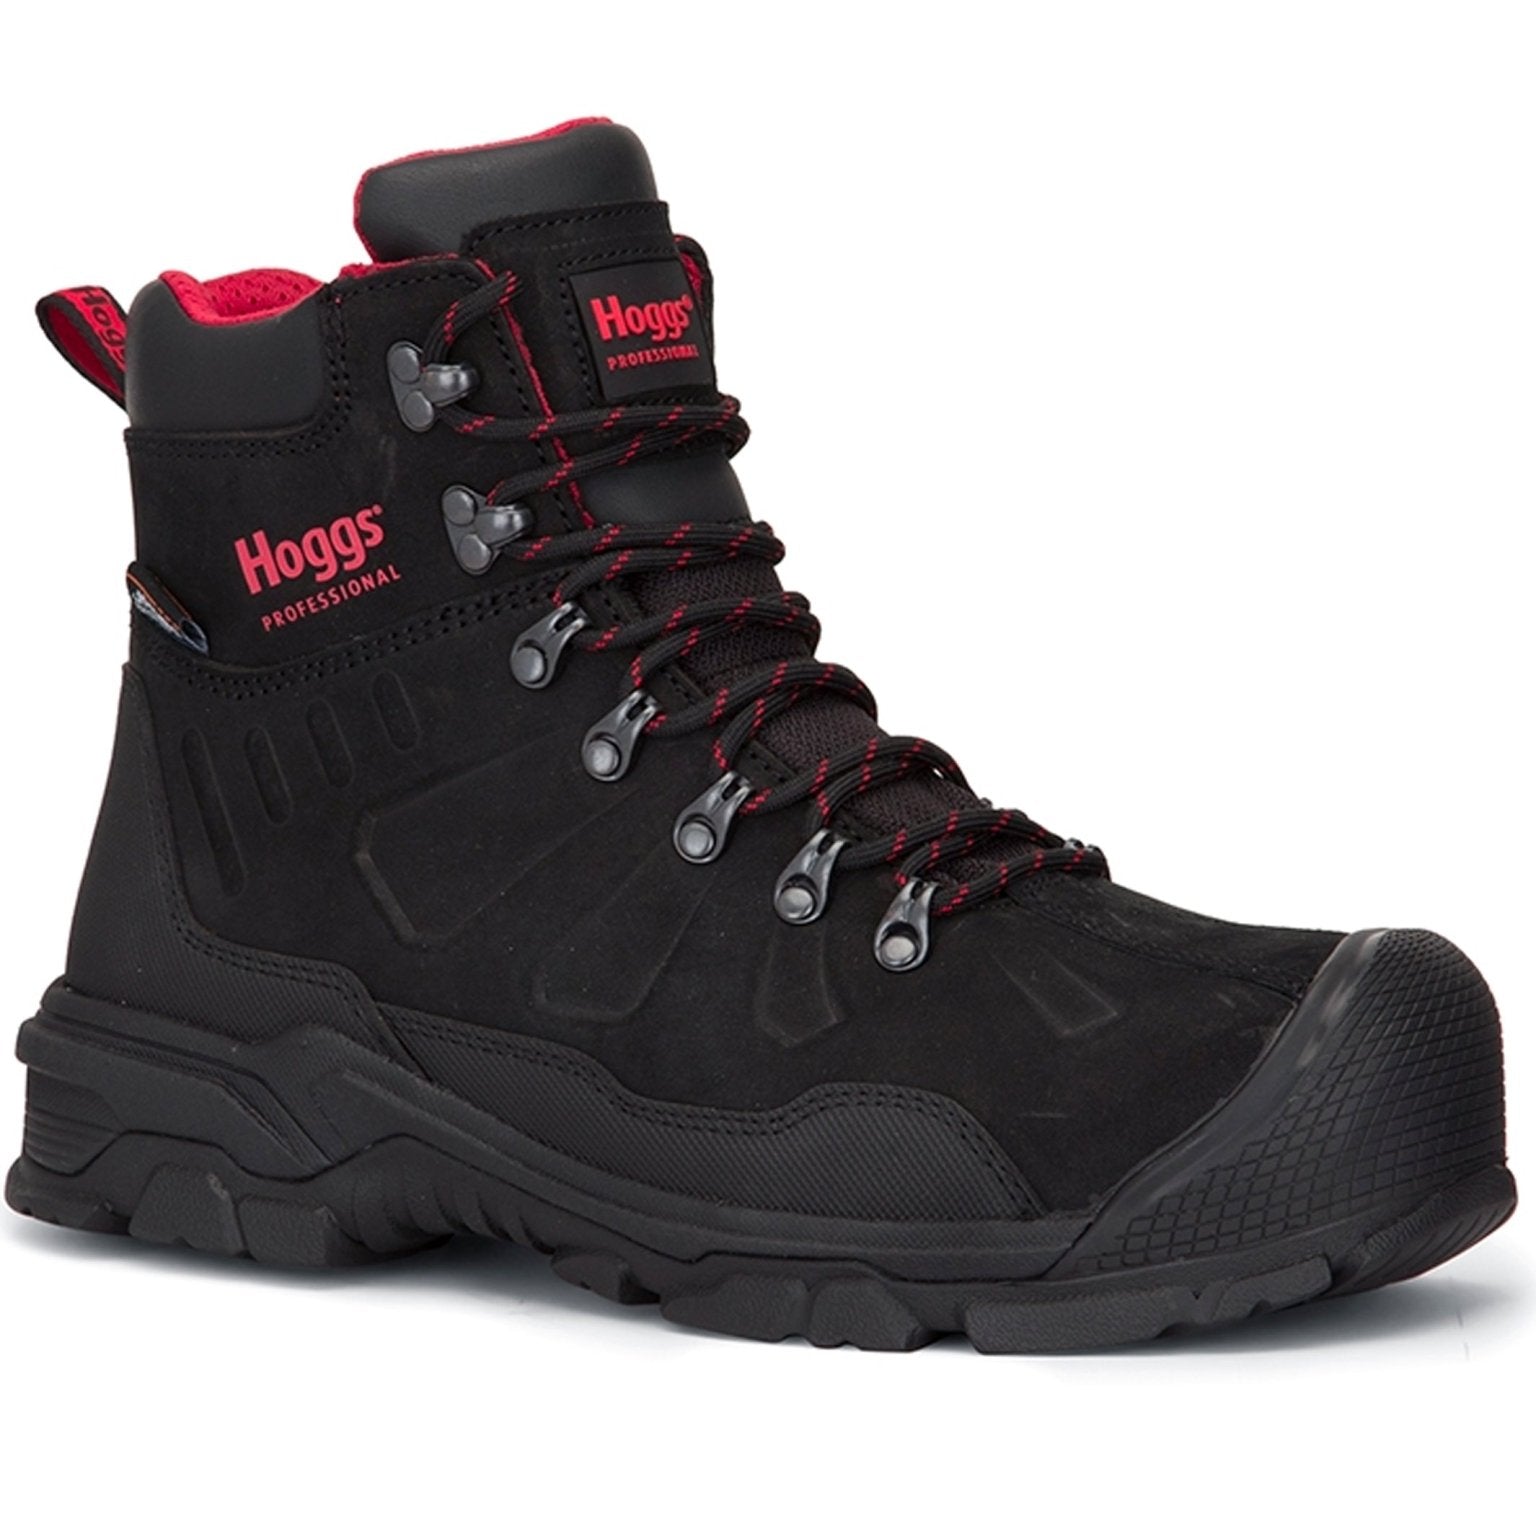 Hoggs of Fife Hoggs of Fife - Poseidon S3 Safety Lace - Up Boot, Waterproof & Breathable Safety Toe cap Lace up Boots Safety Footwear